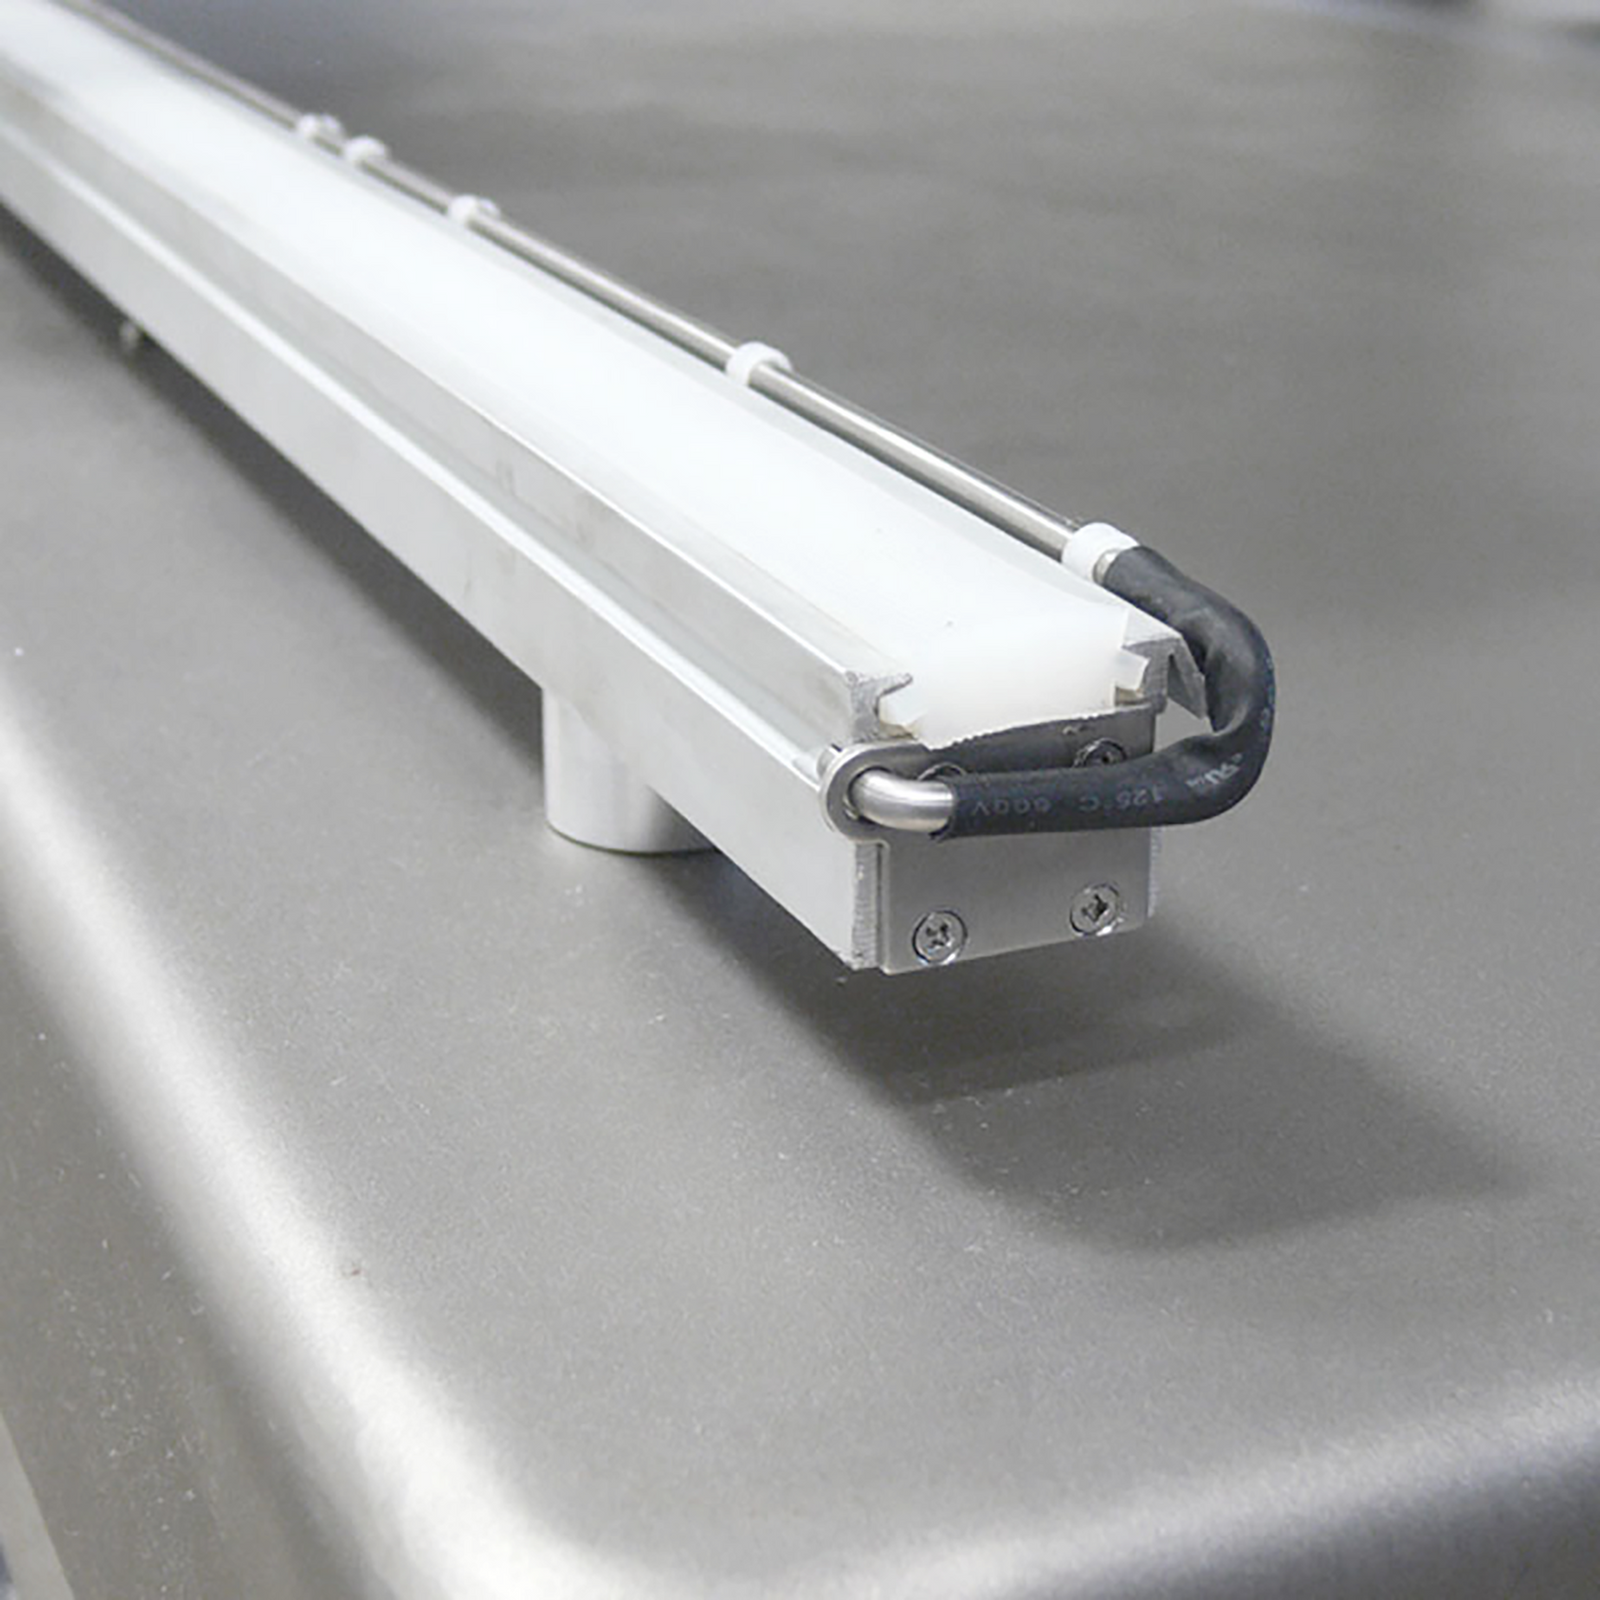 32 inch seal bar of the heavy duty double chamber vacuum sealer